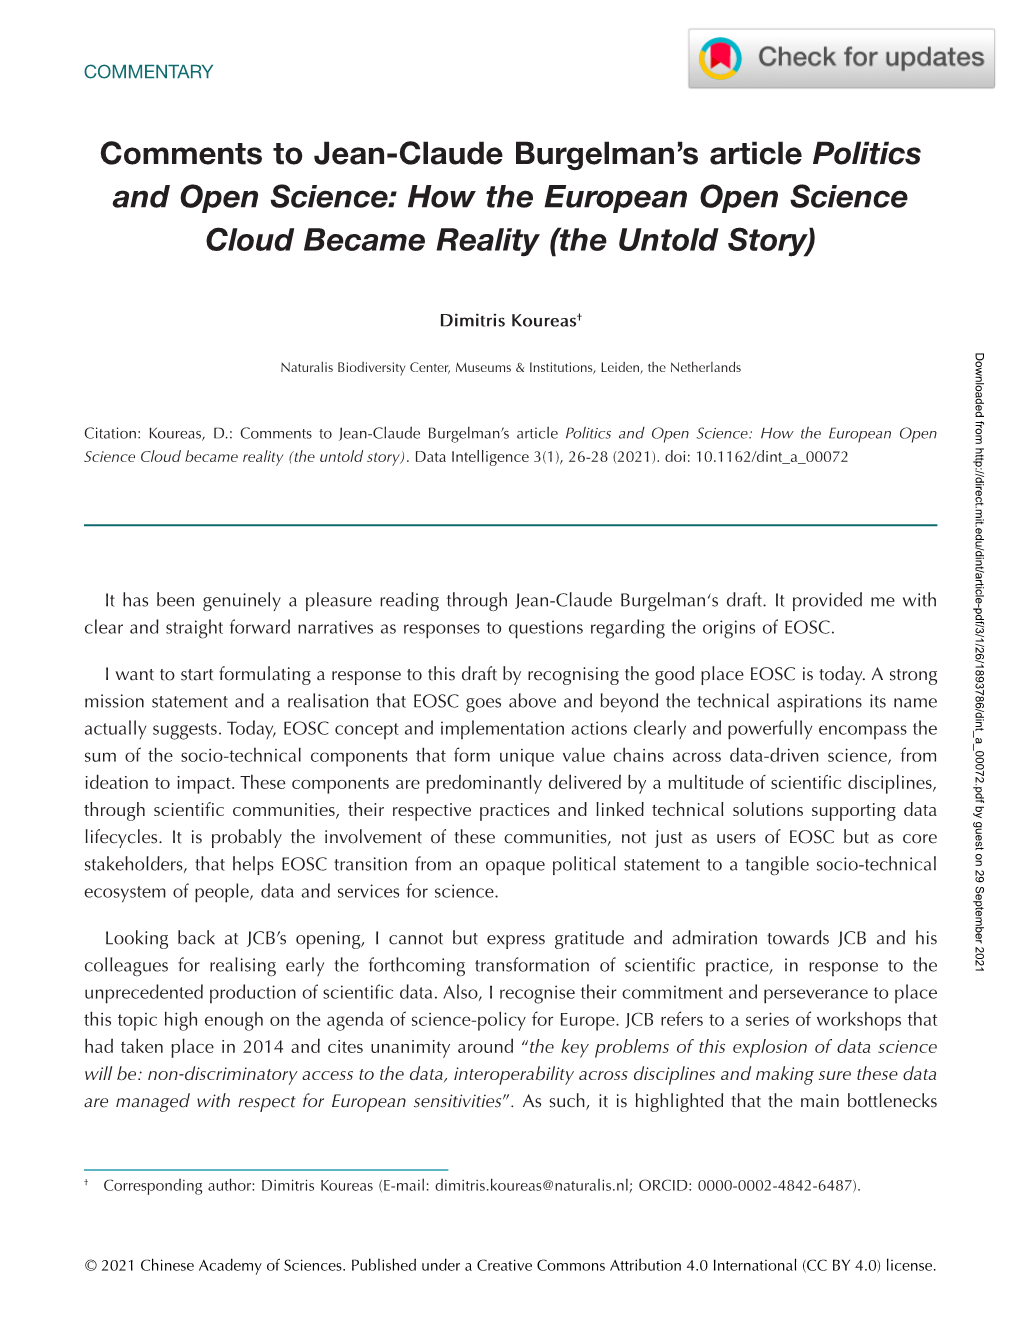 How the European Open Science Cloud Became Reality (The Untold Story)